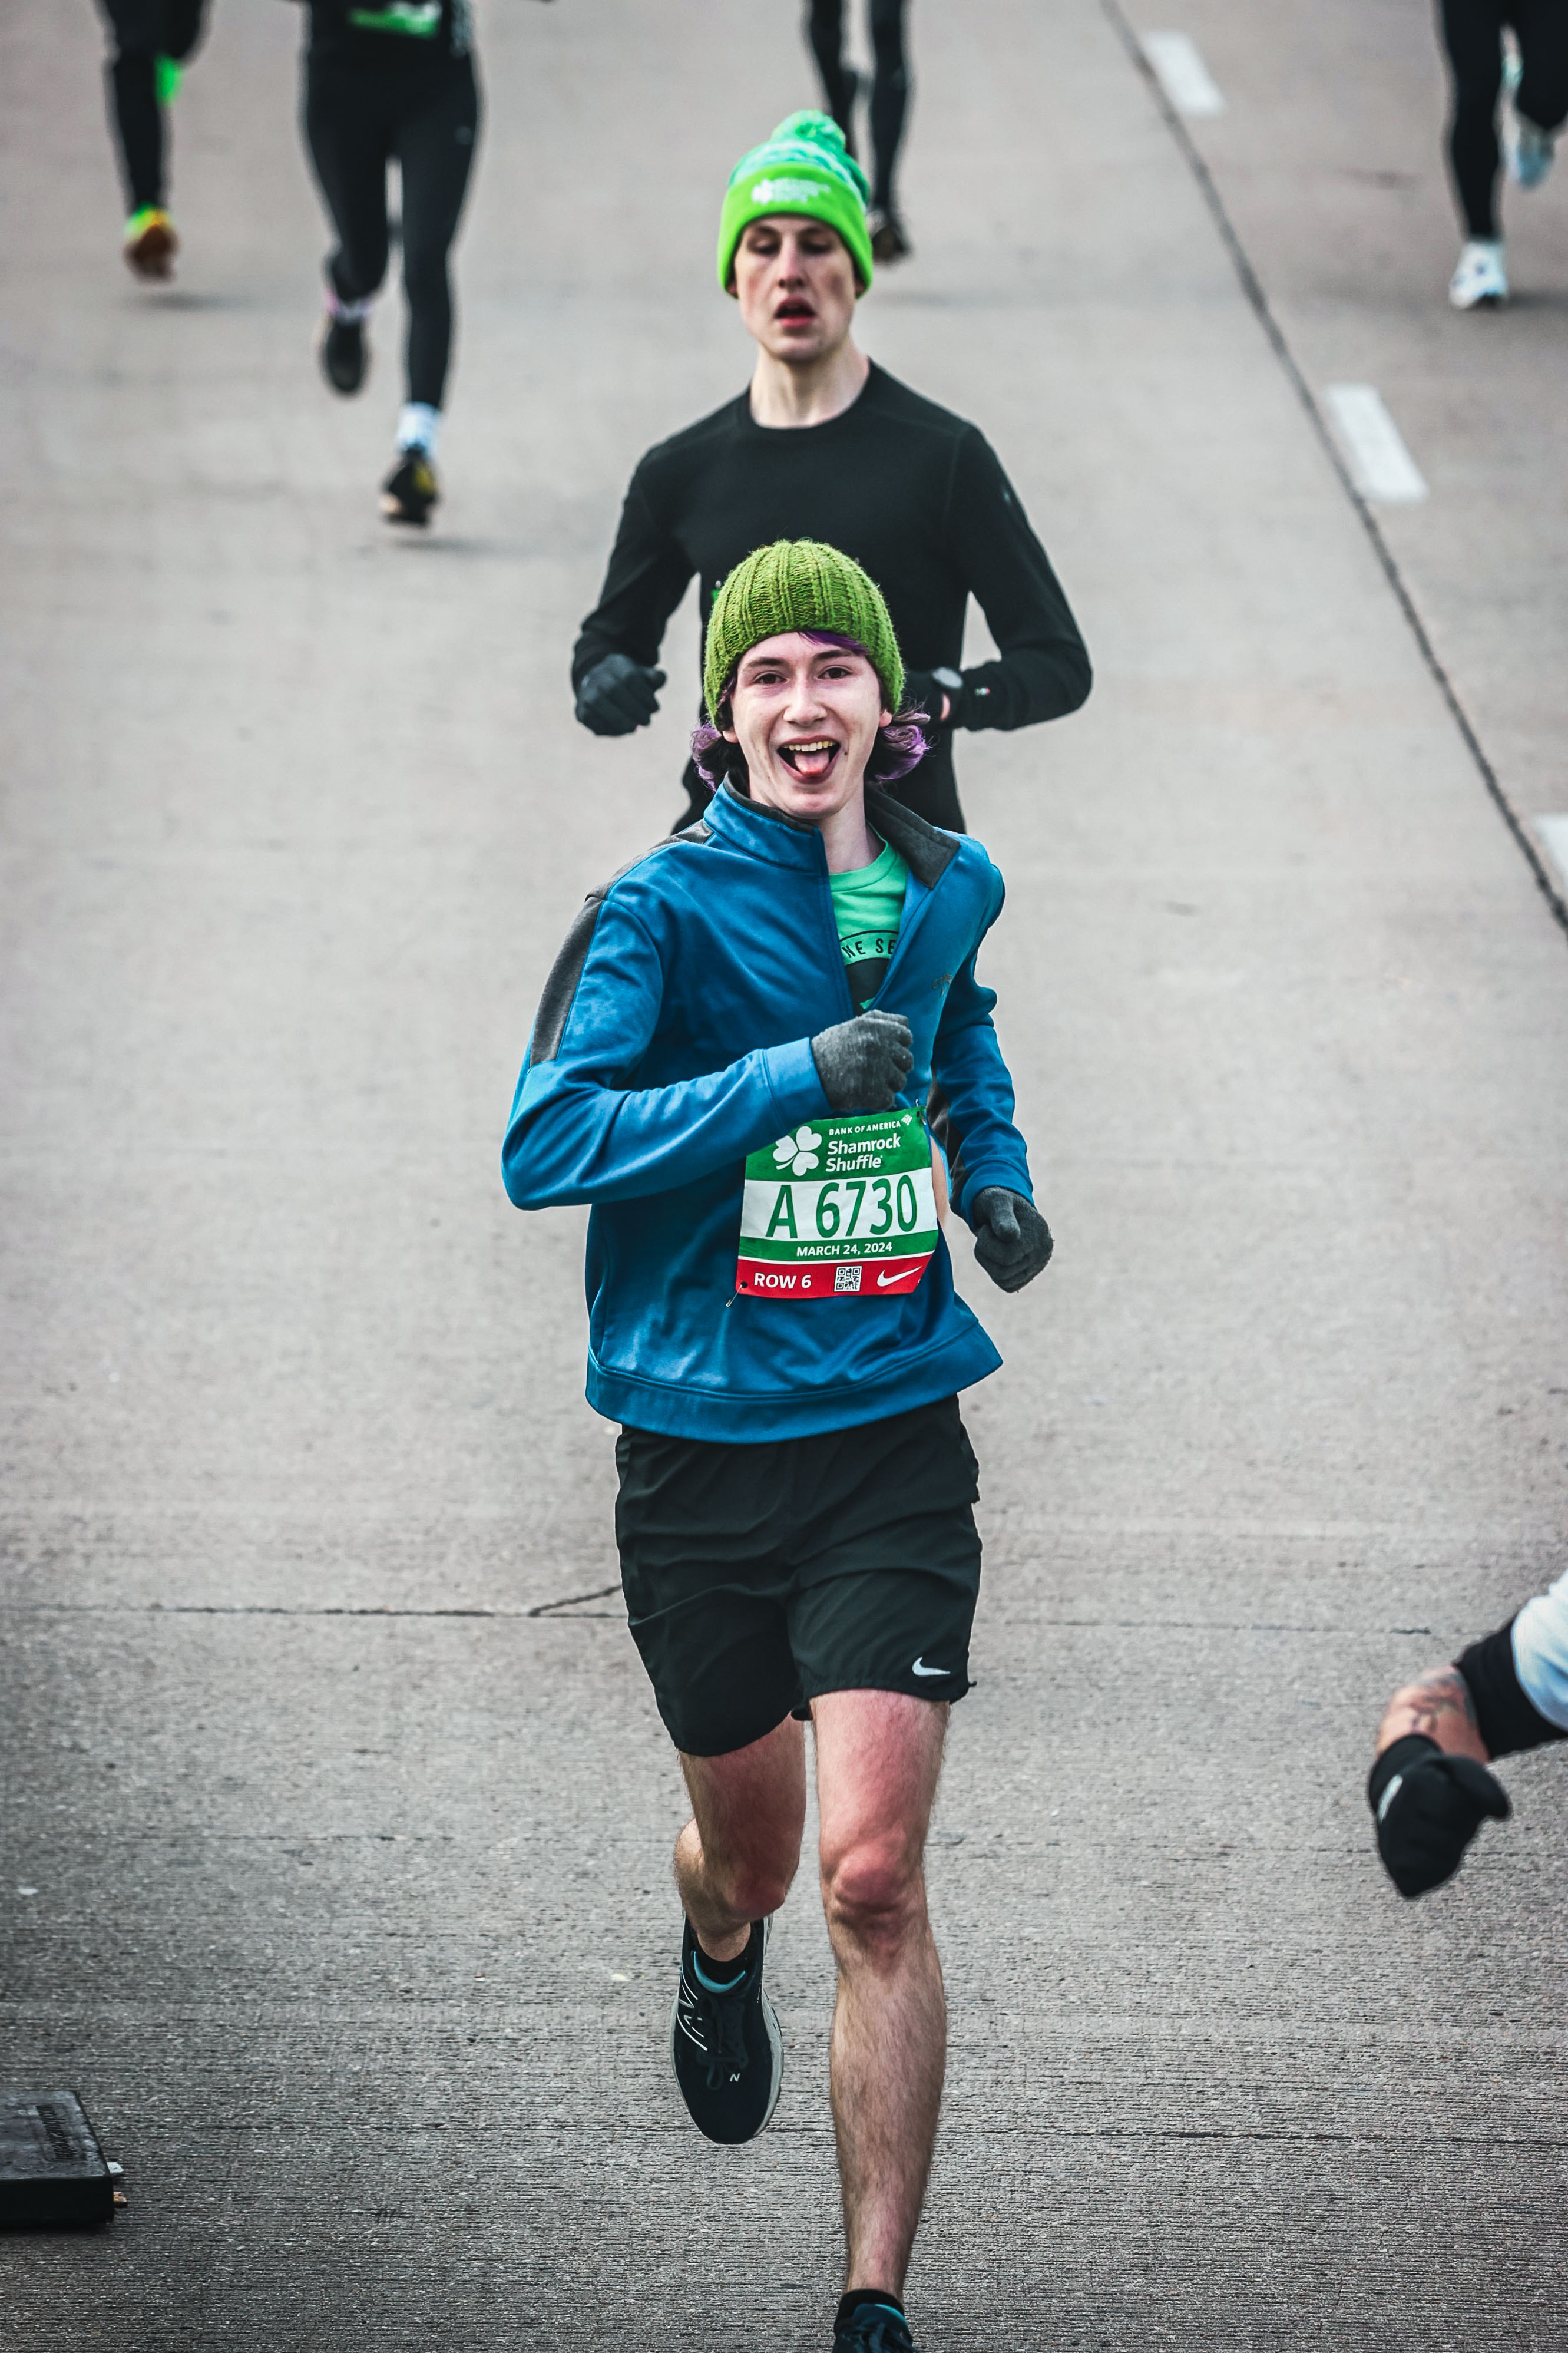 Me running across the finish line with a blue jacket and a green knit hat. My tongue is sticking out.